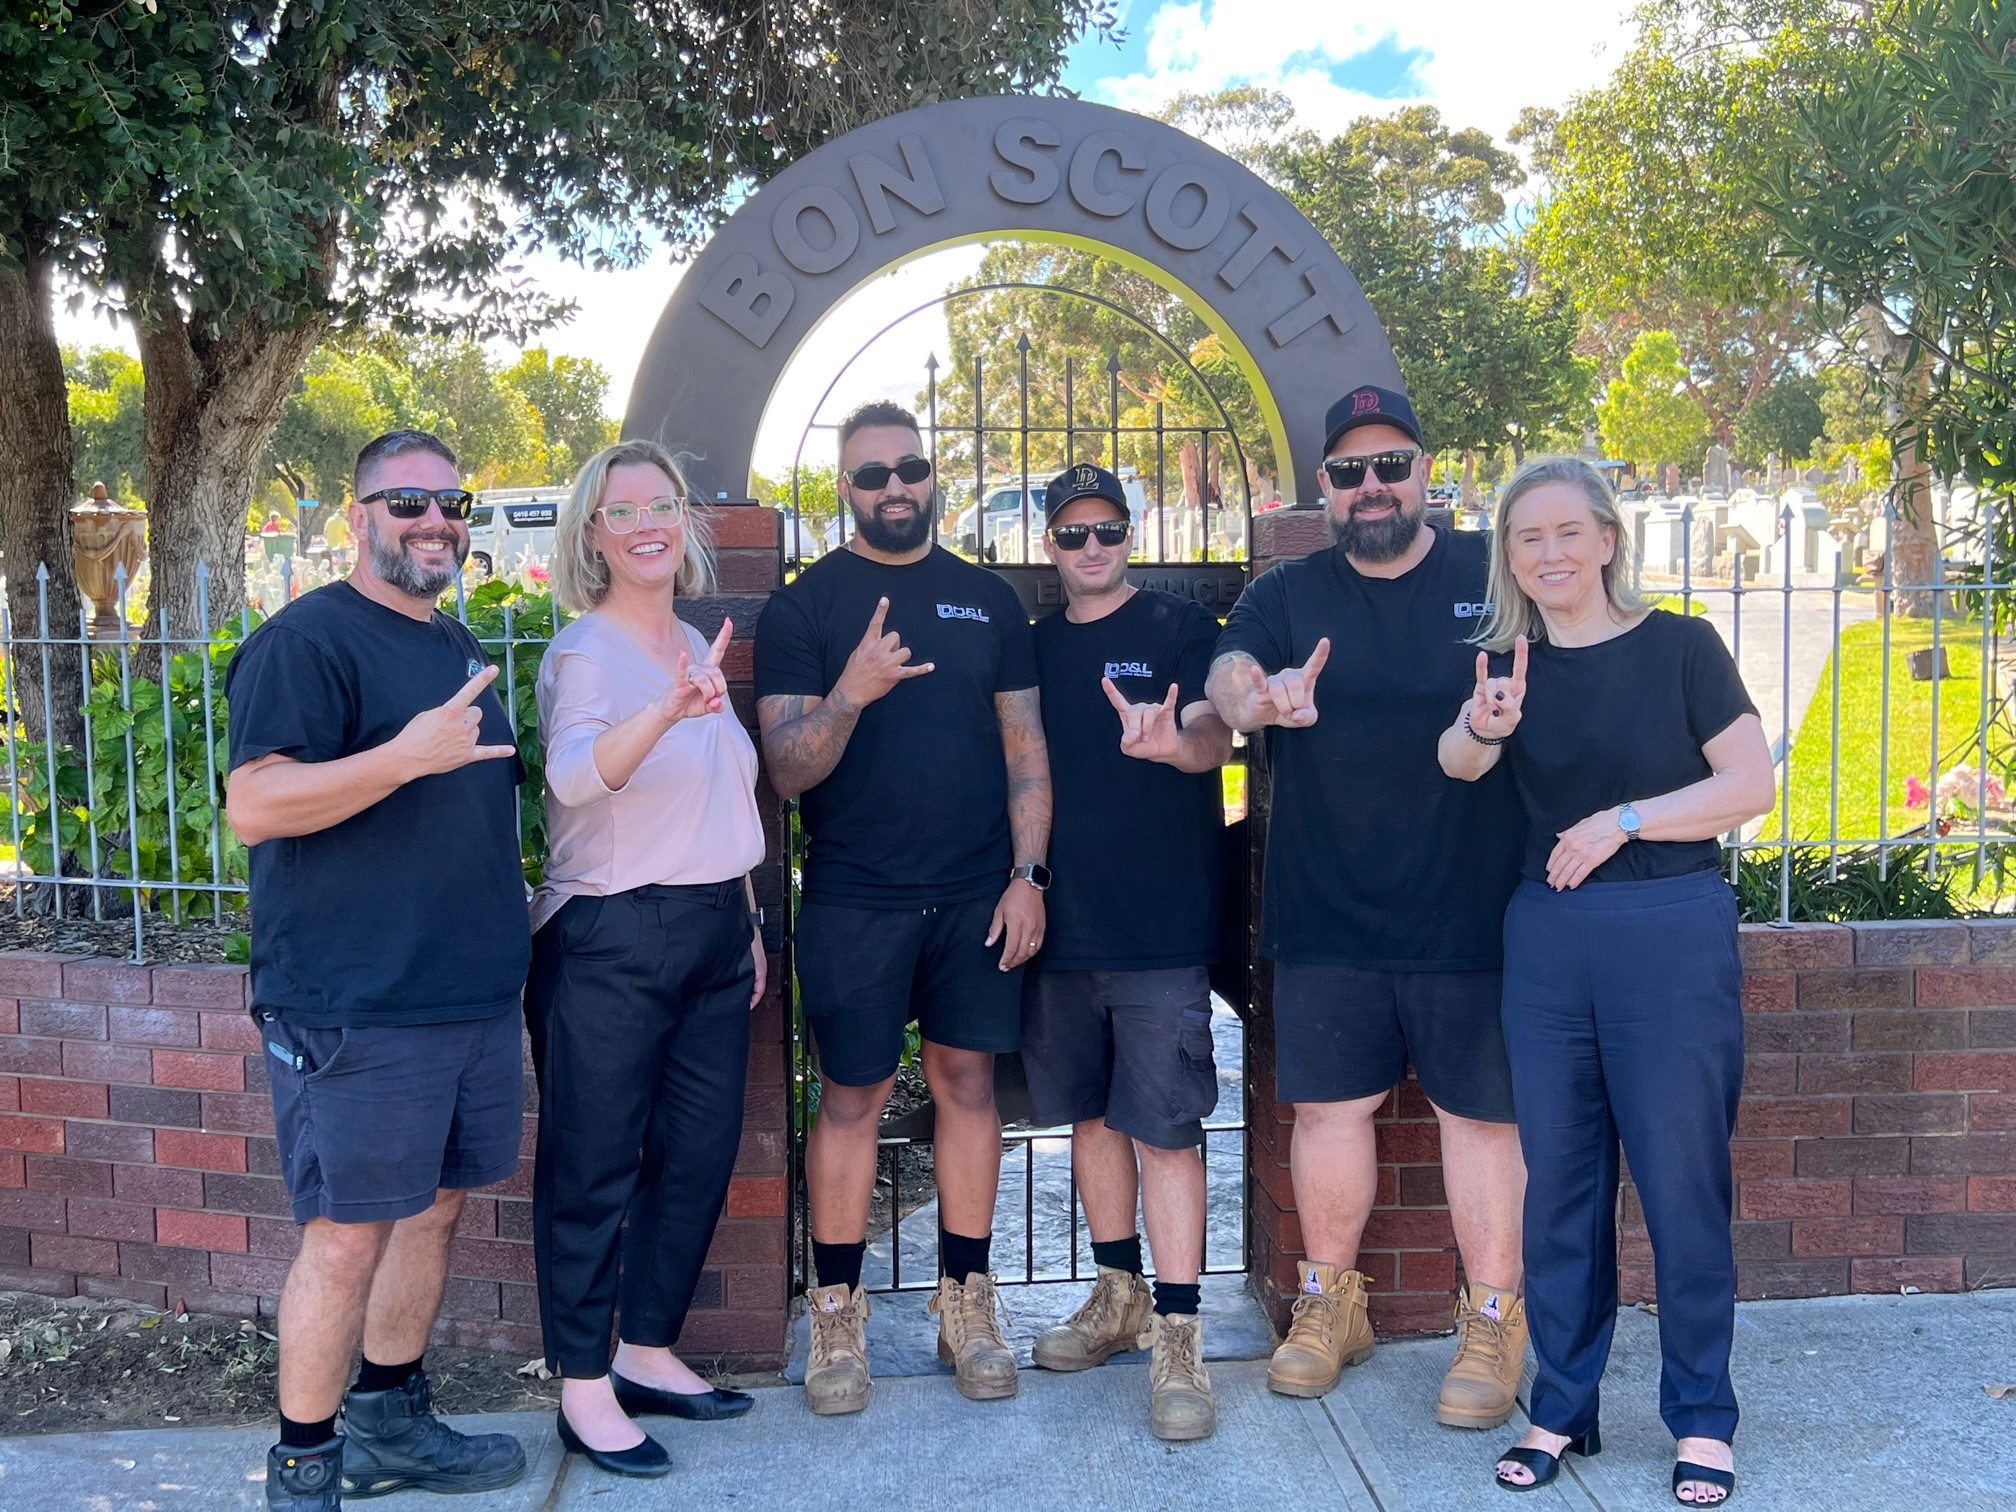 the Hon. Hannah Beazley MLA and Hon. Simone McGurk MLA in the front of the Bon Scott gate at Fremantle Cemetery with the crew of D and L Building Services who restored the gate gesturing the hand sign of 'rock on'